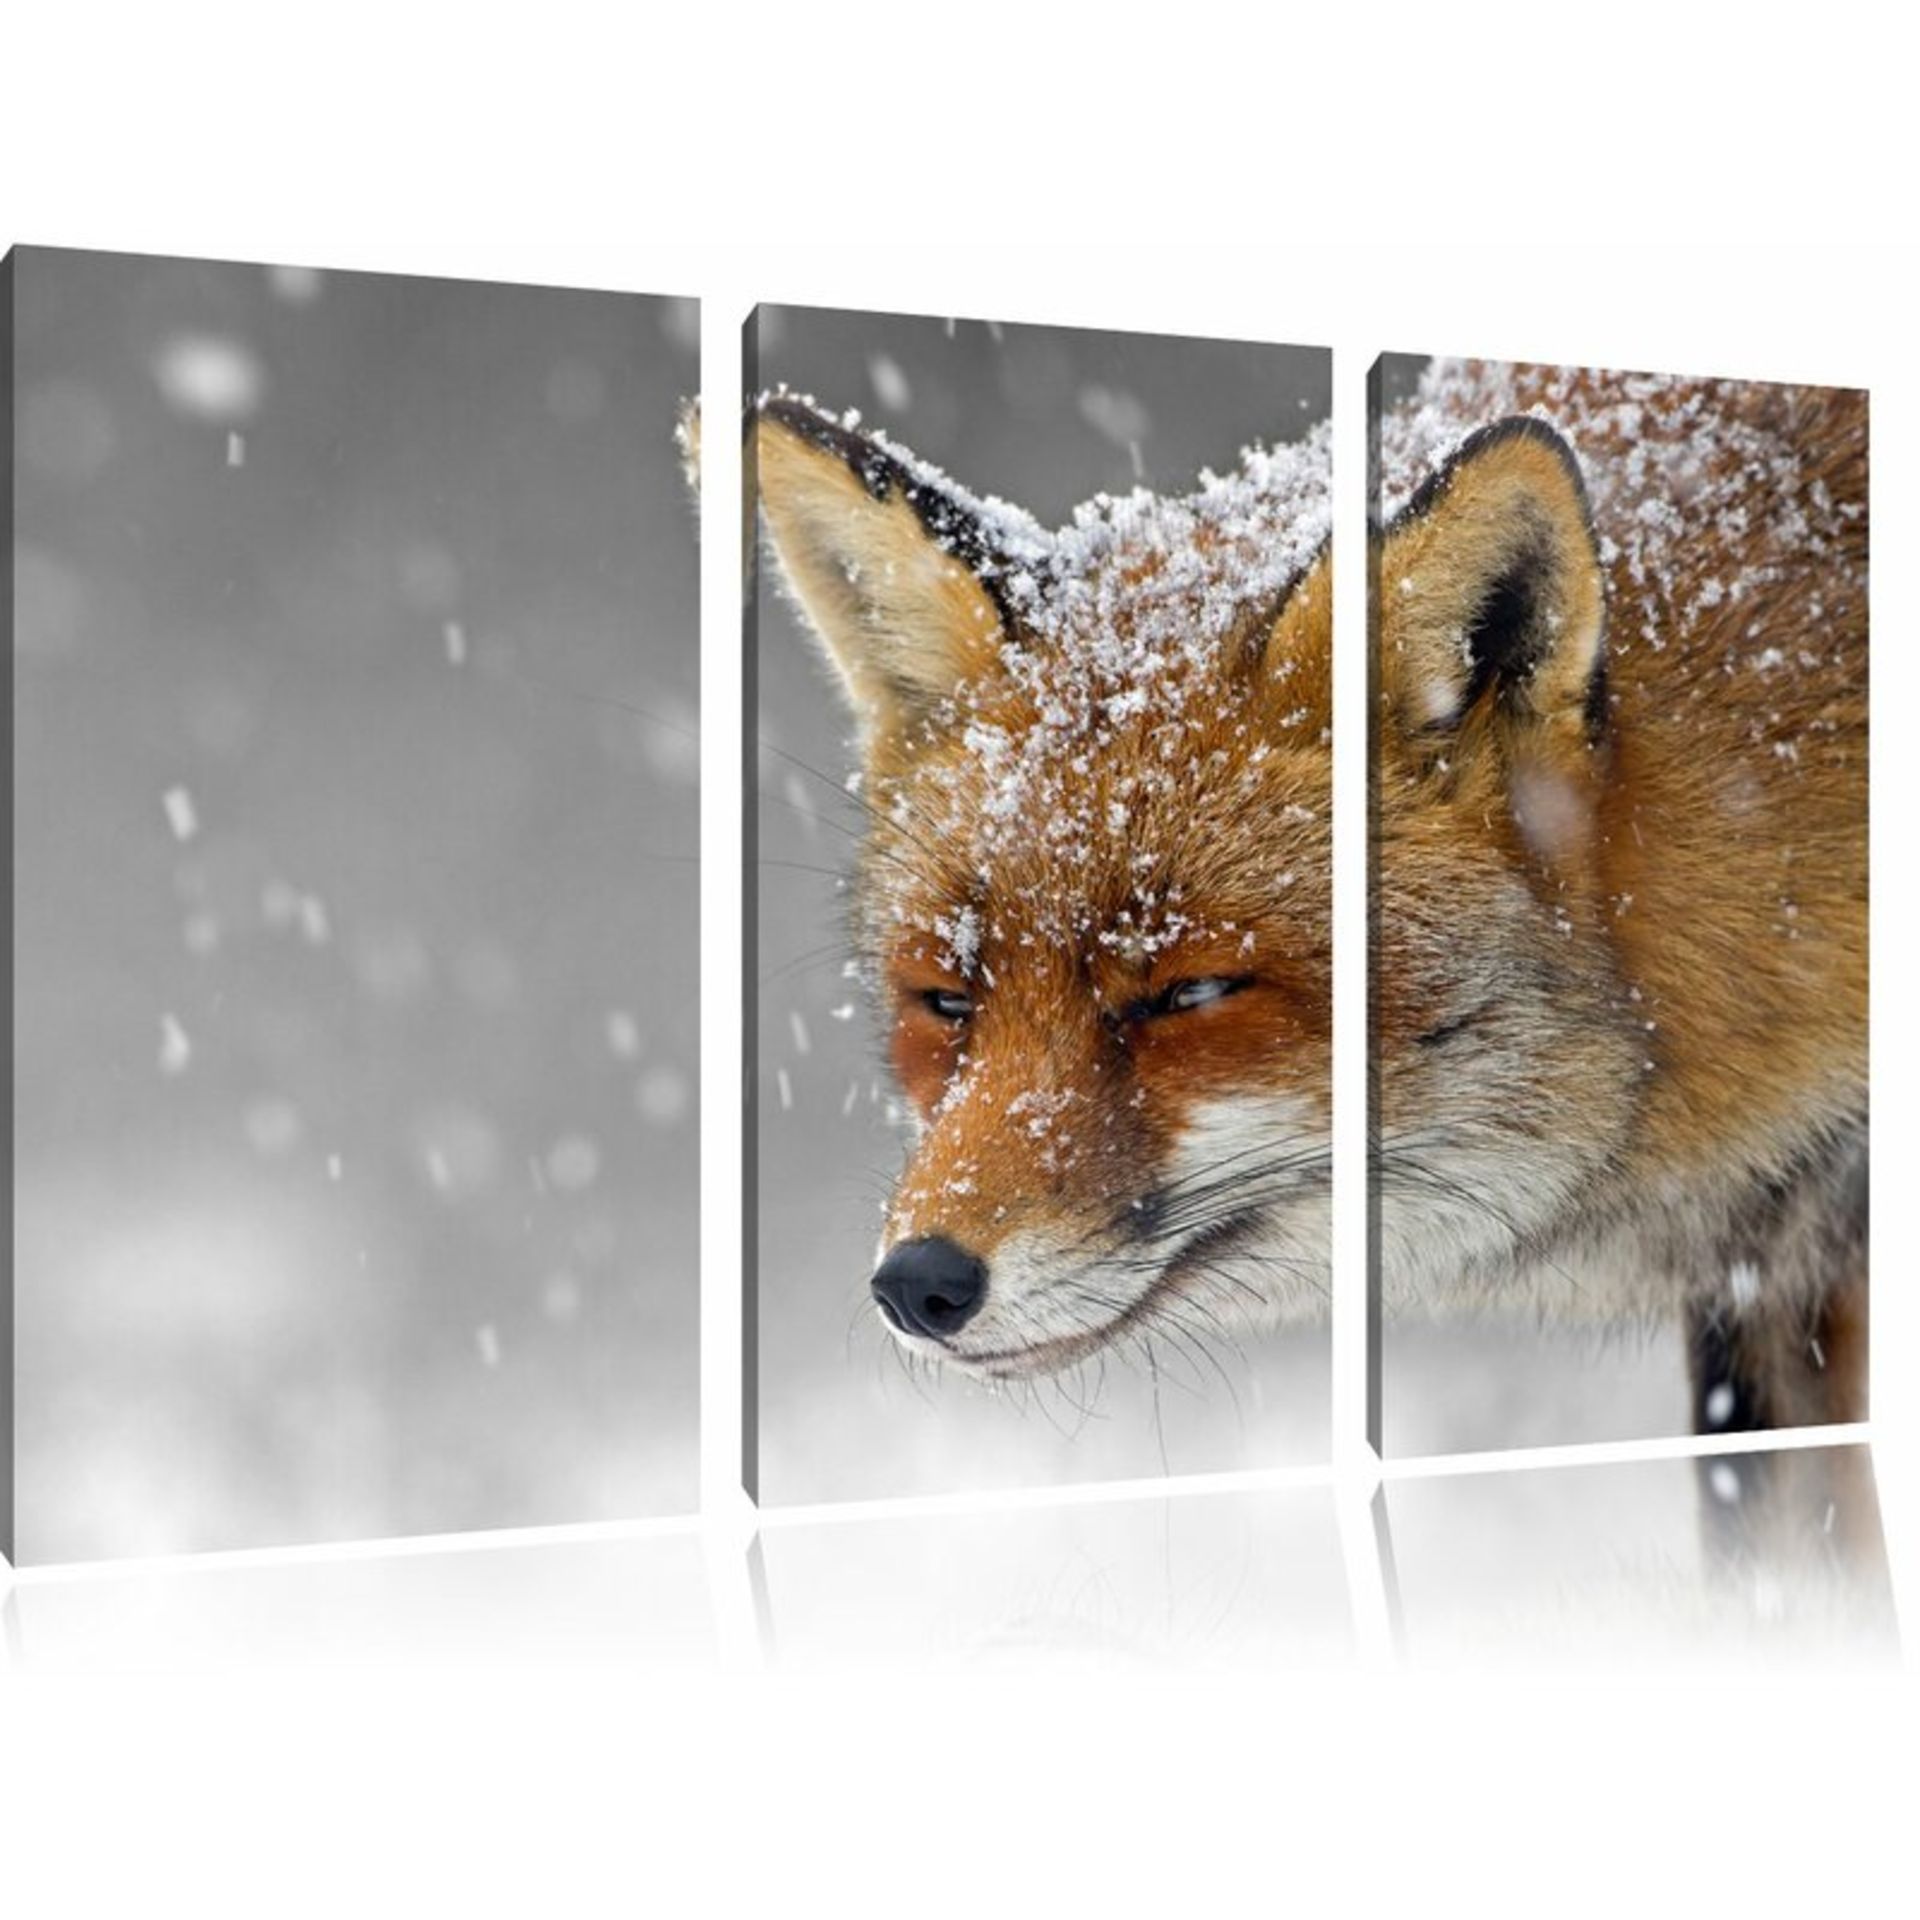 Beautiful Fox in Snow 3-Piece Photographic Print on Canvas Set by Pixxprint